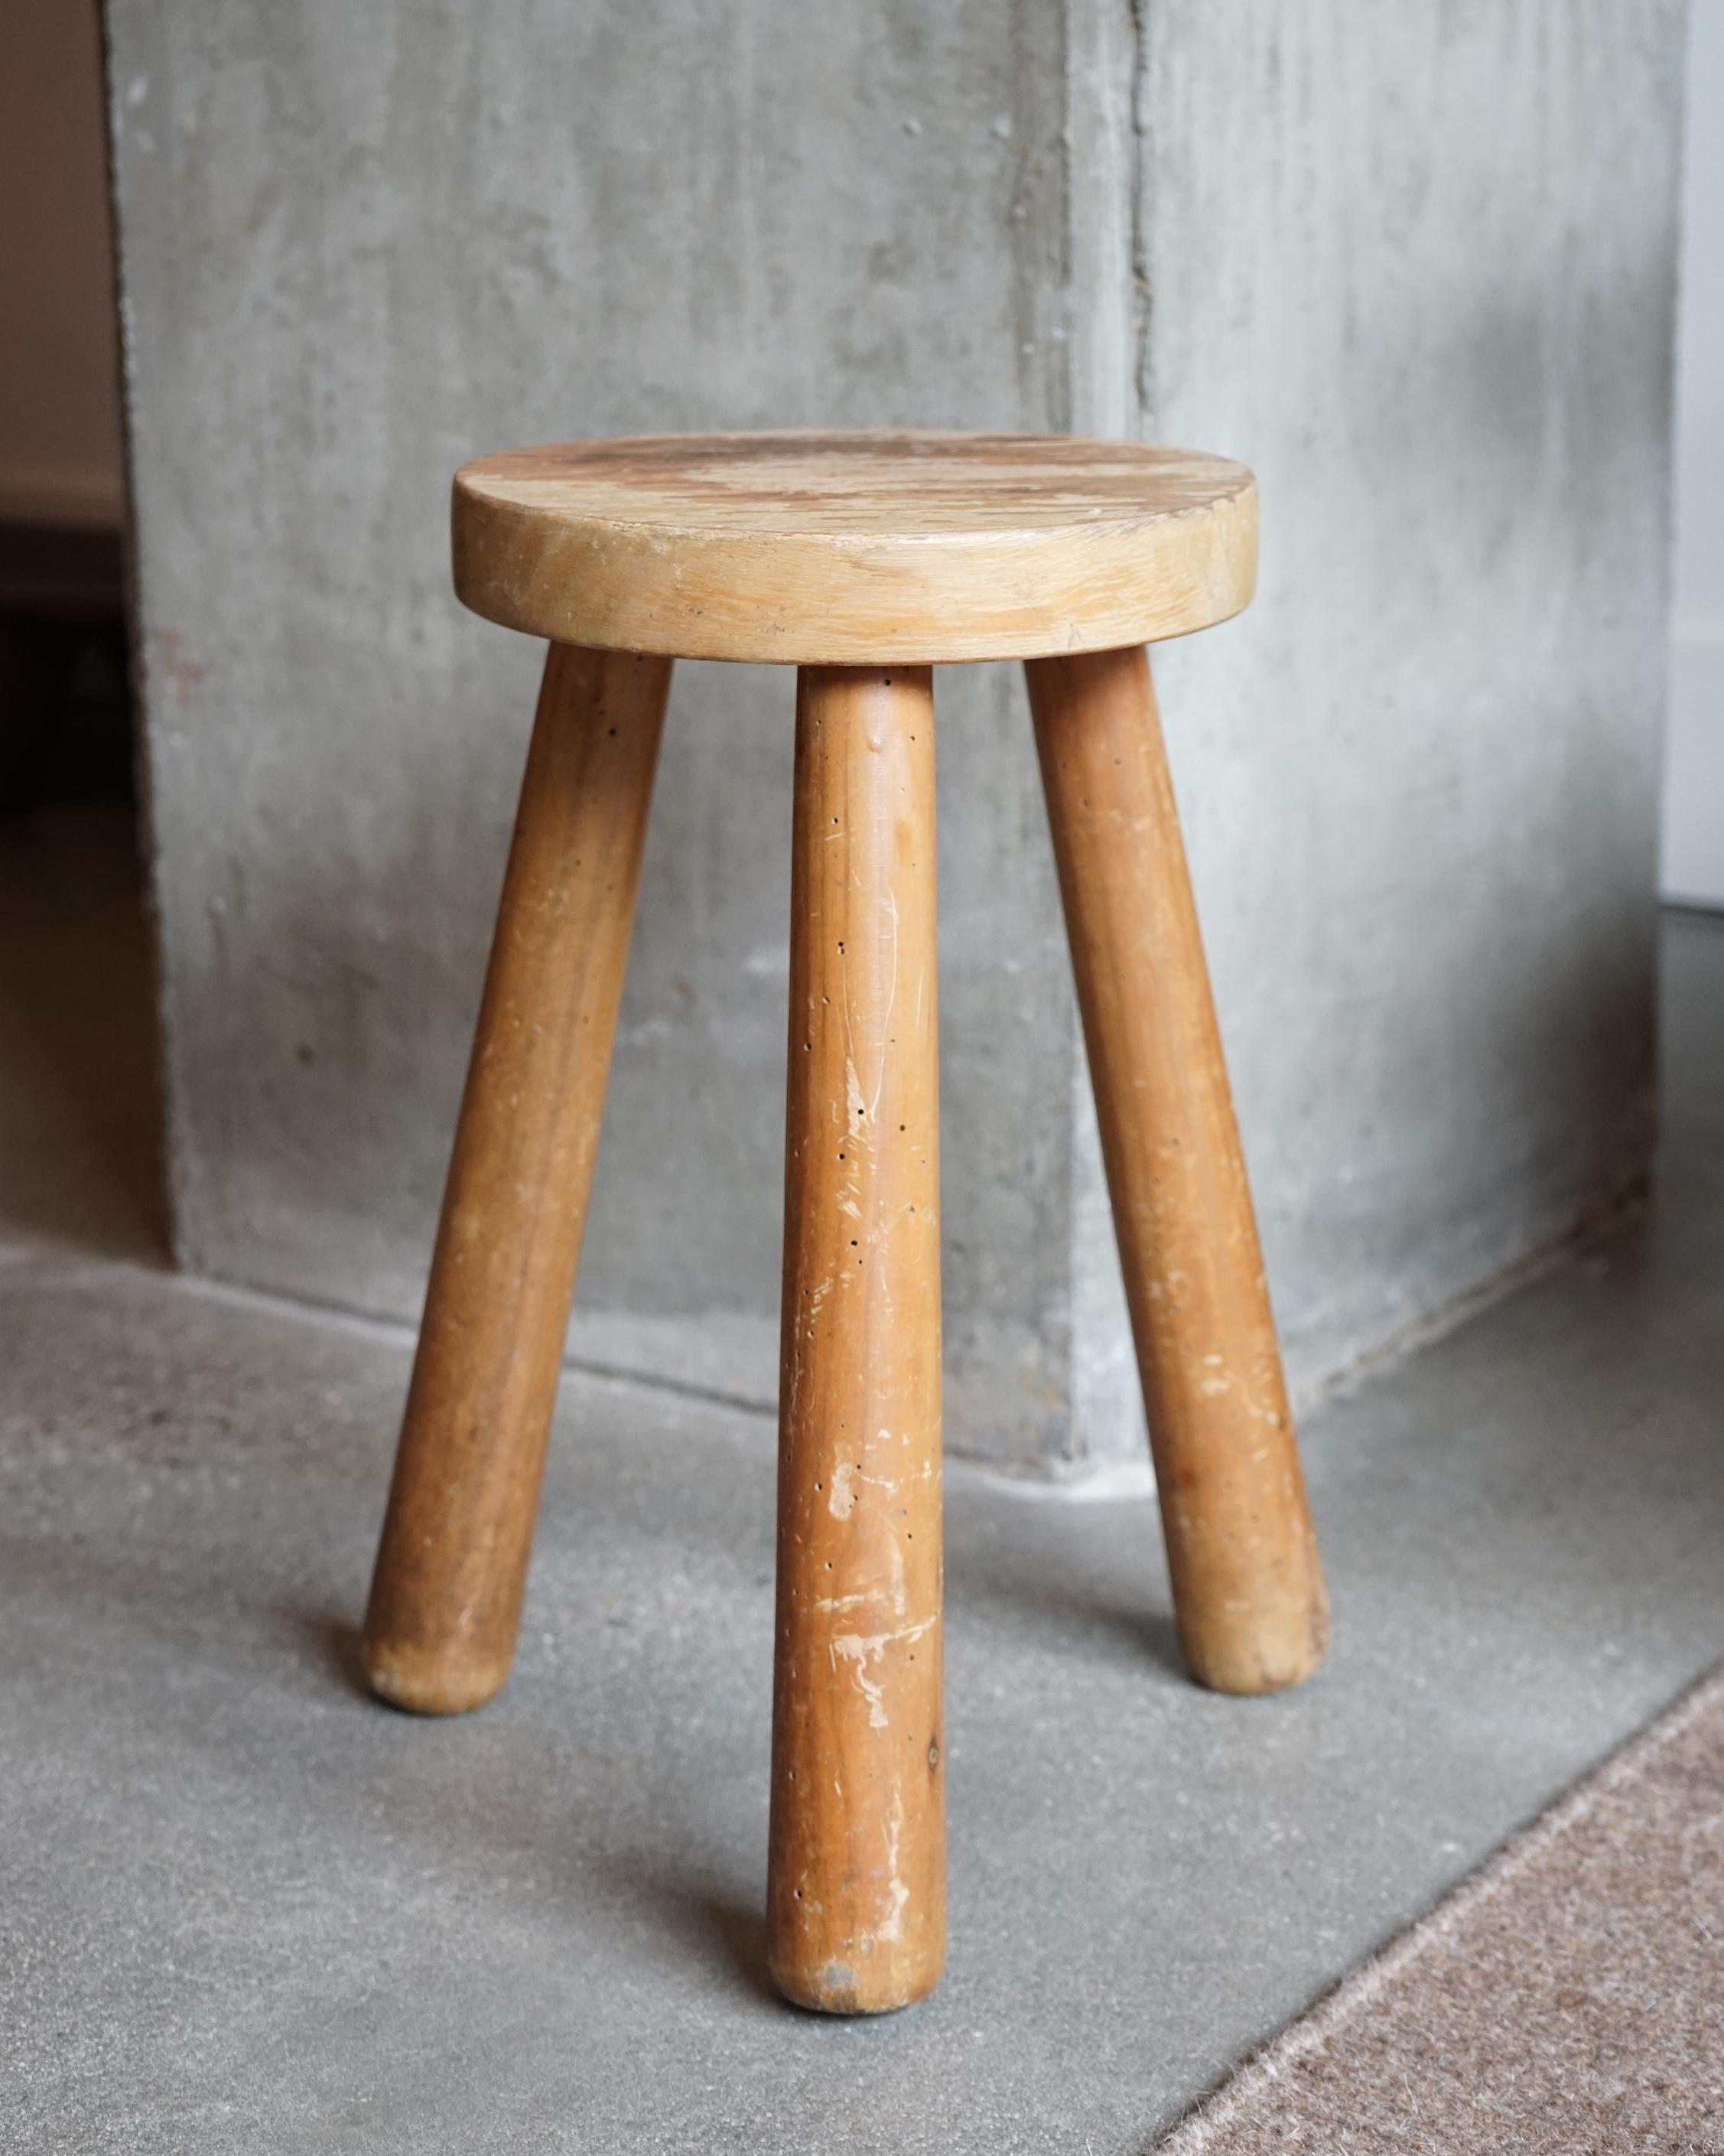 Vintage stool from France 

1940's 

Excellent patina and structurally sound. 

Measures: 15